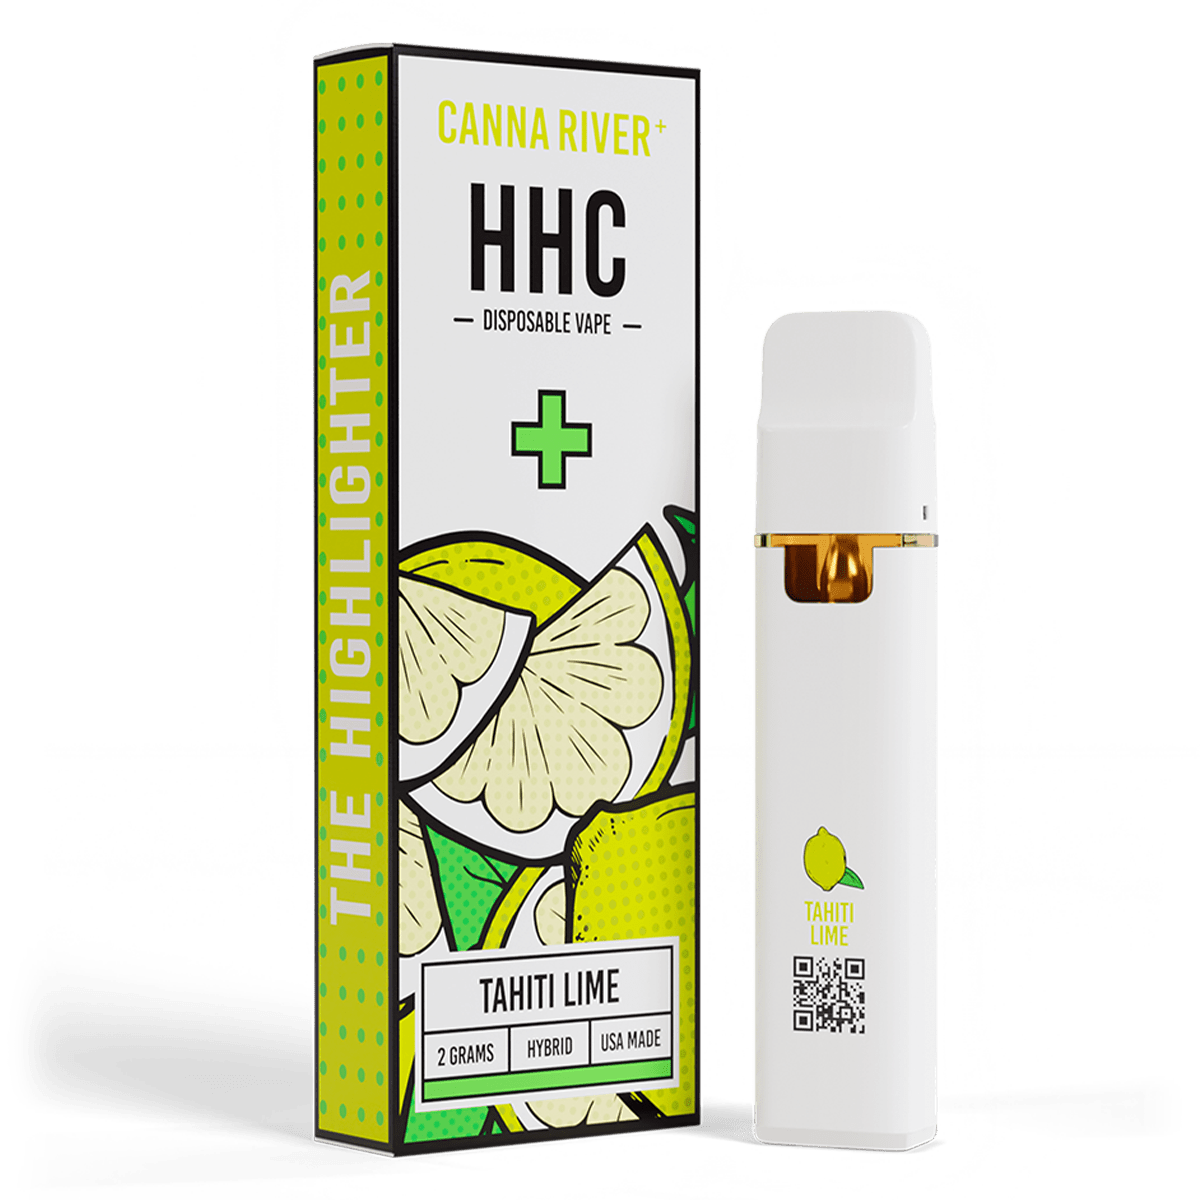 Canna River HHC Disposable Best Price